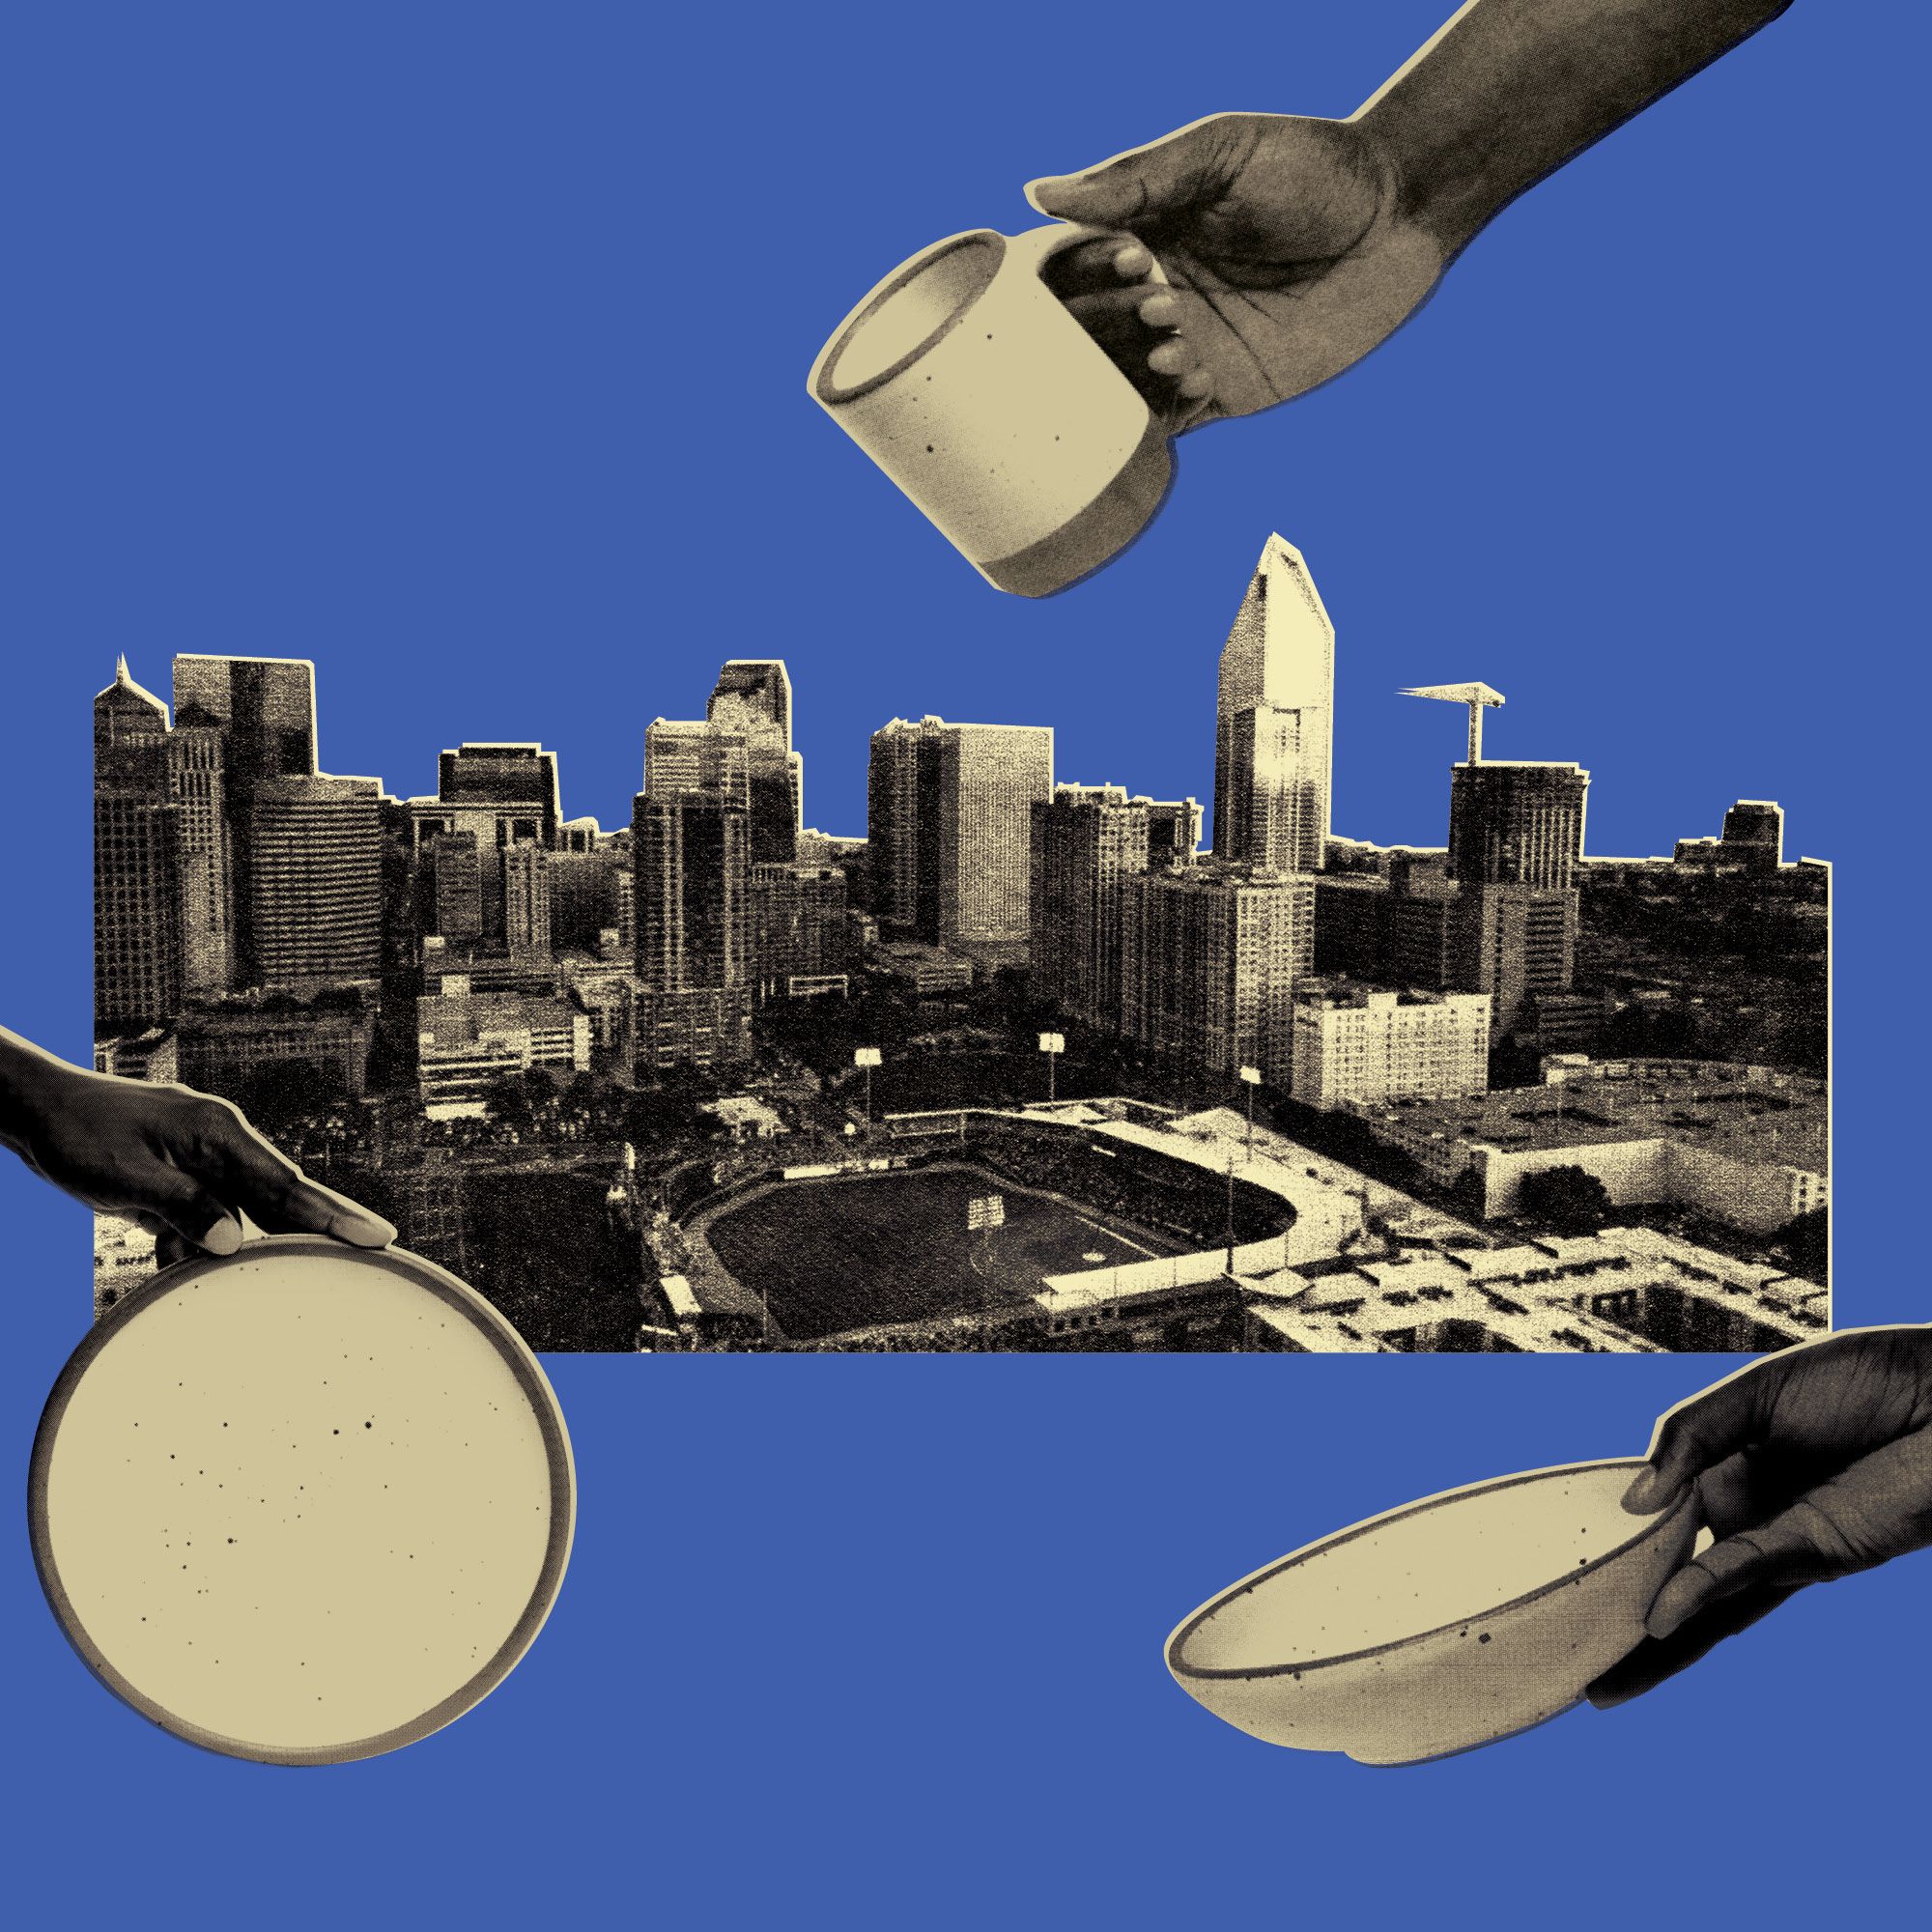 A black and white collage featuring a city landscape of Charlotte North Carolina, and three hands holding a bowl, a plate, and a mug. All against a blue background.